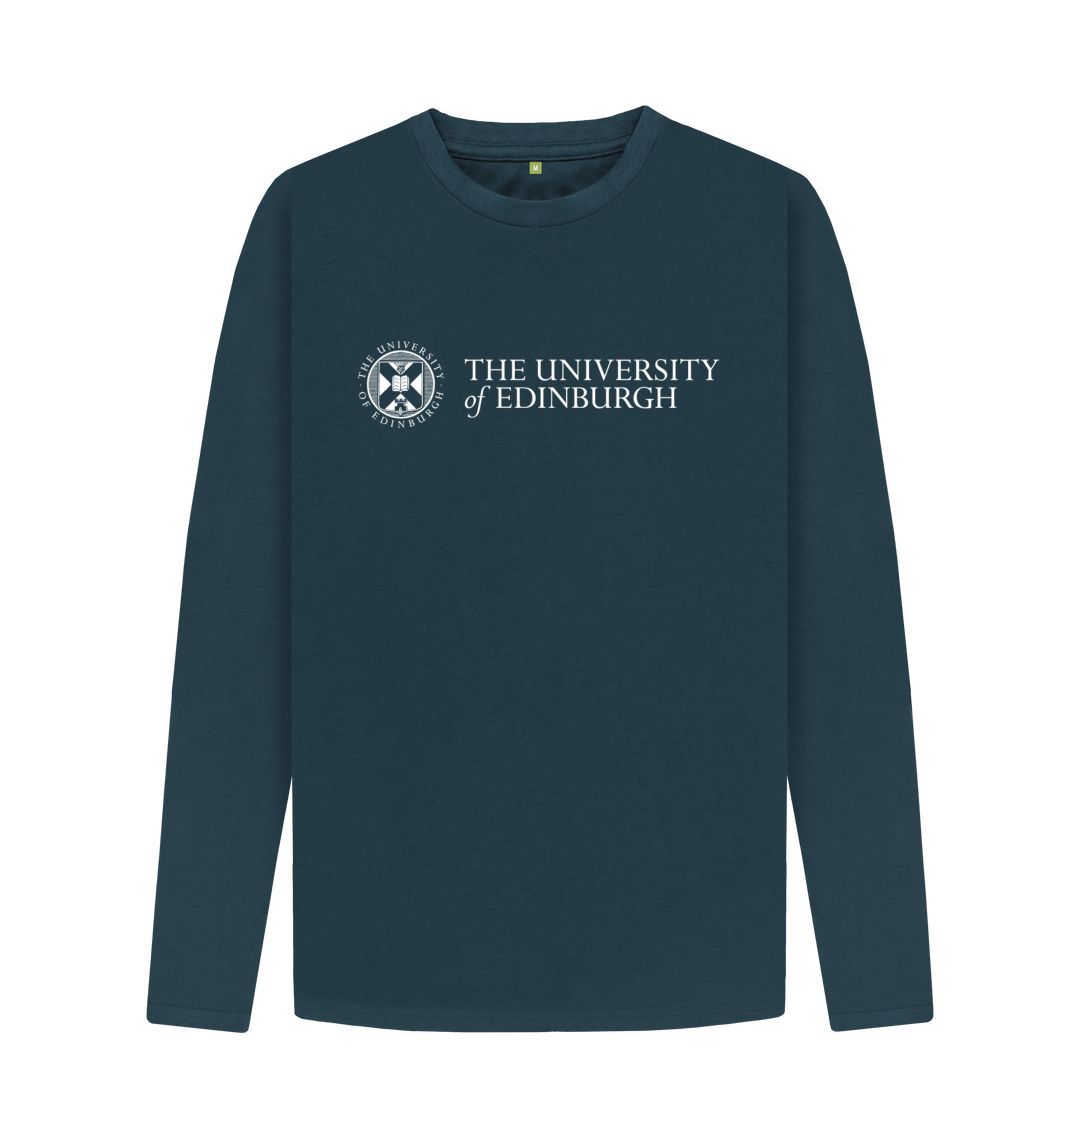 A demin blue long sleeved t-shirt with the University logo printed across the chest in white